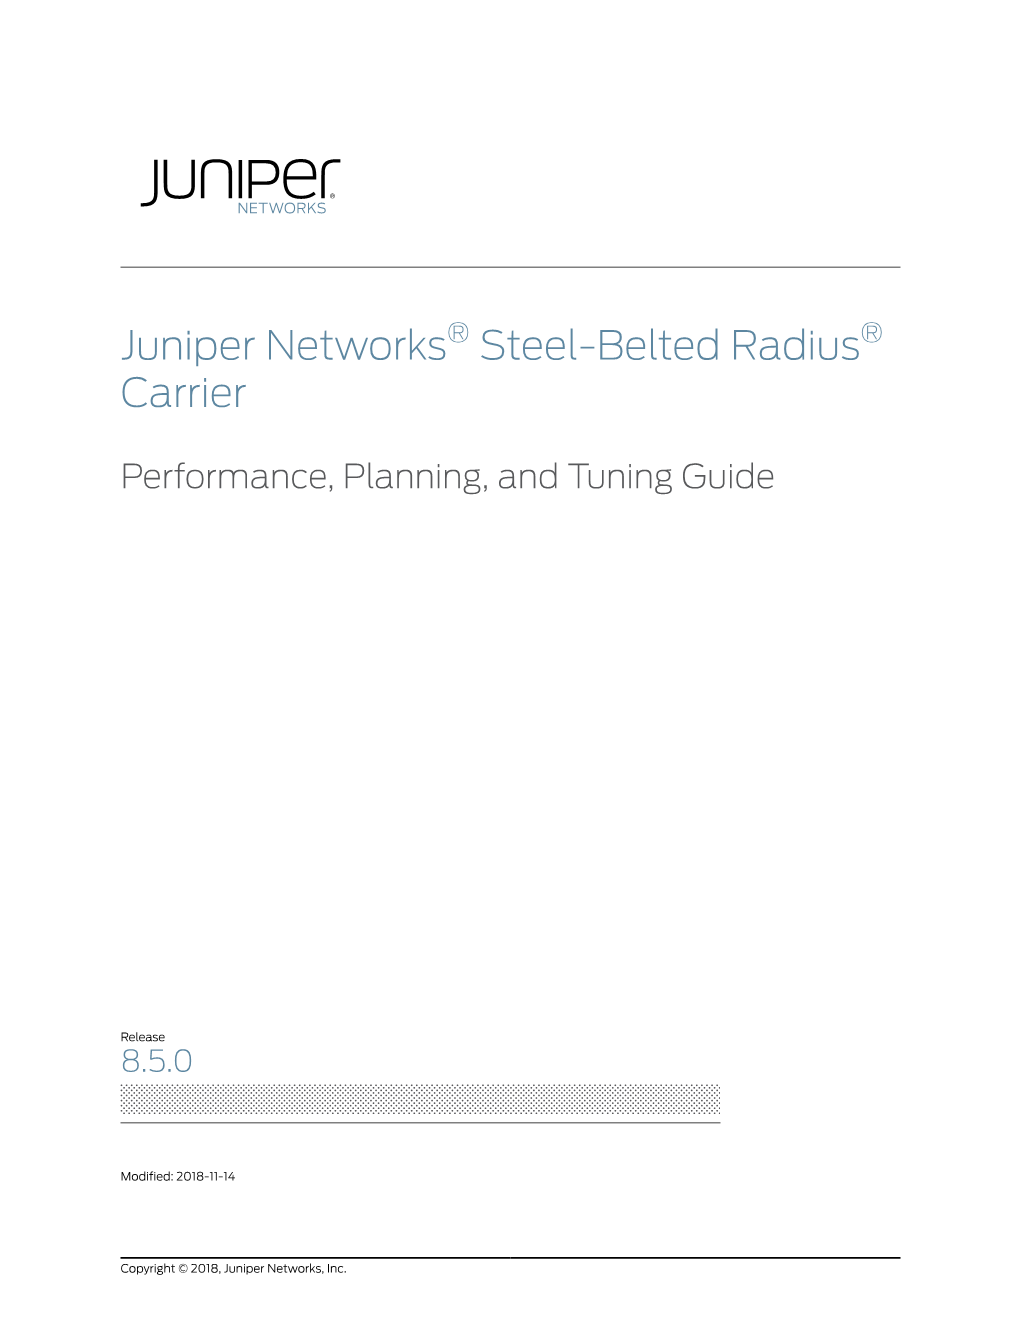 Juniper Networks® Steel-Belted Radius® Carrier Performance, Planning, and Tuning Guide Release 8.5.0